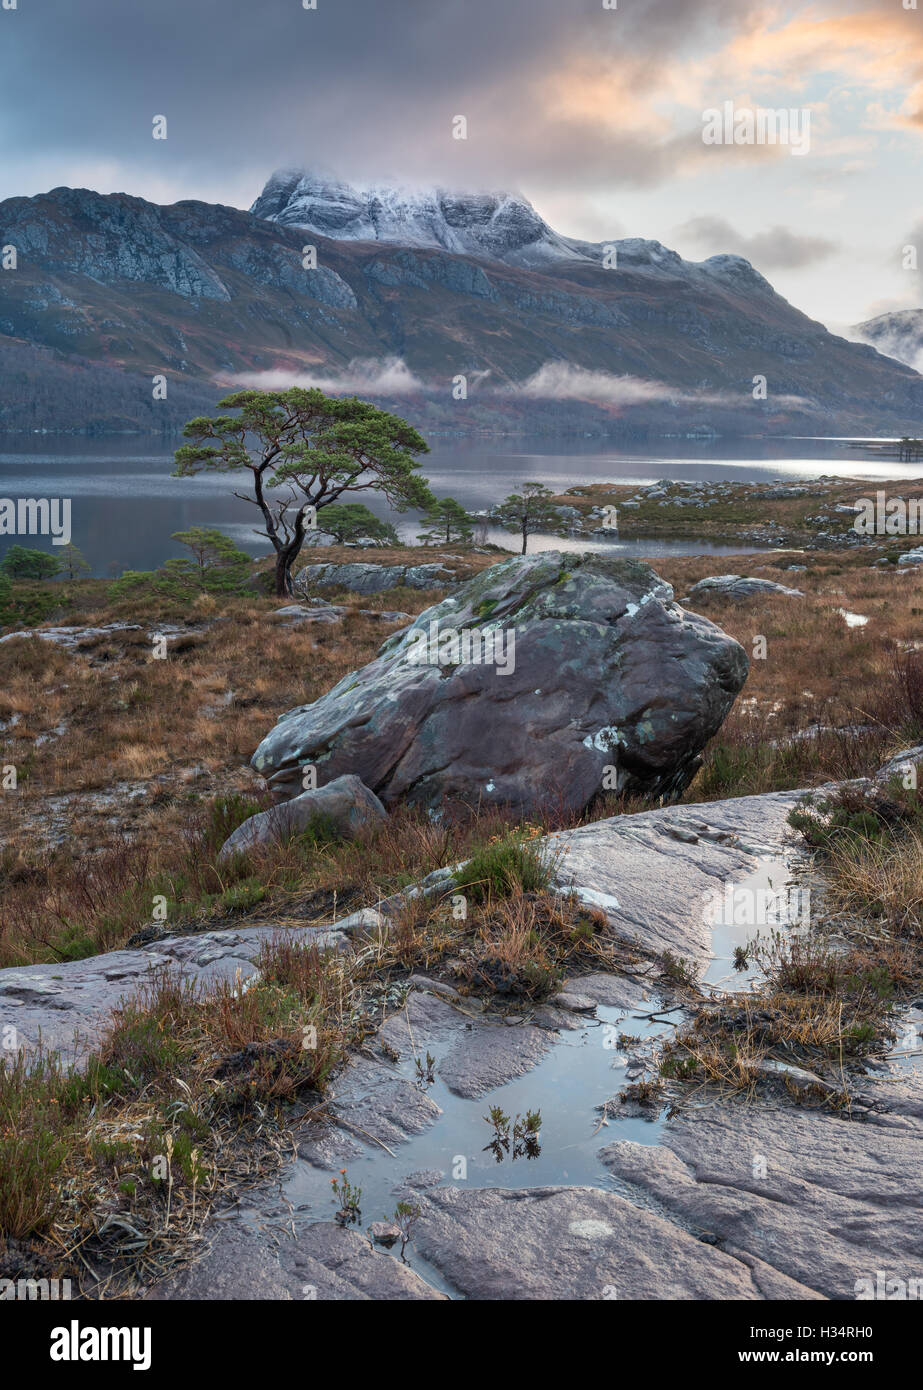 Lone Scots pine tree on the shores of Loch Maree, with a snow capped Slioch in the background, Scottish Highlands, Scotland Stock Photo